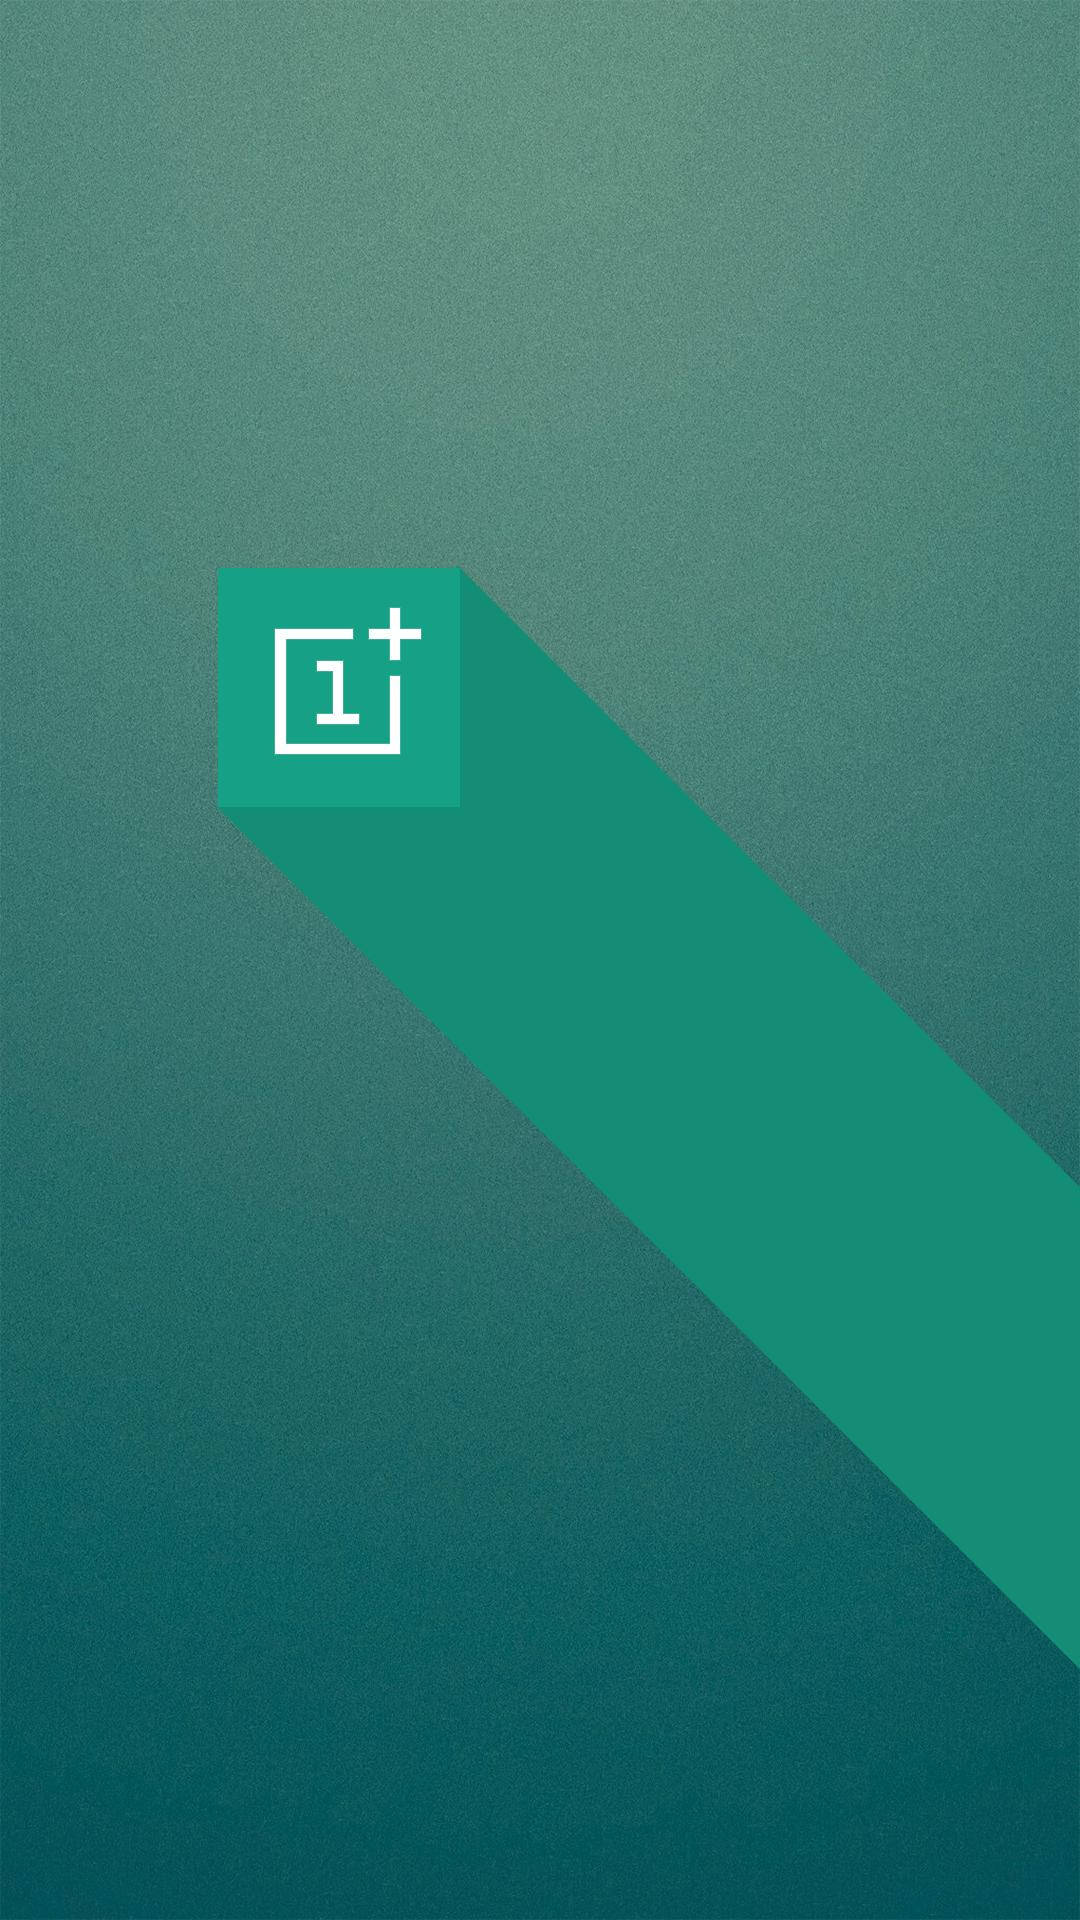 Oneplus Logo On Green Cube Background